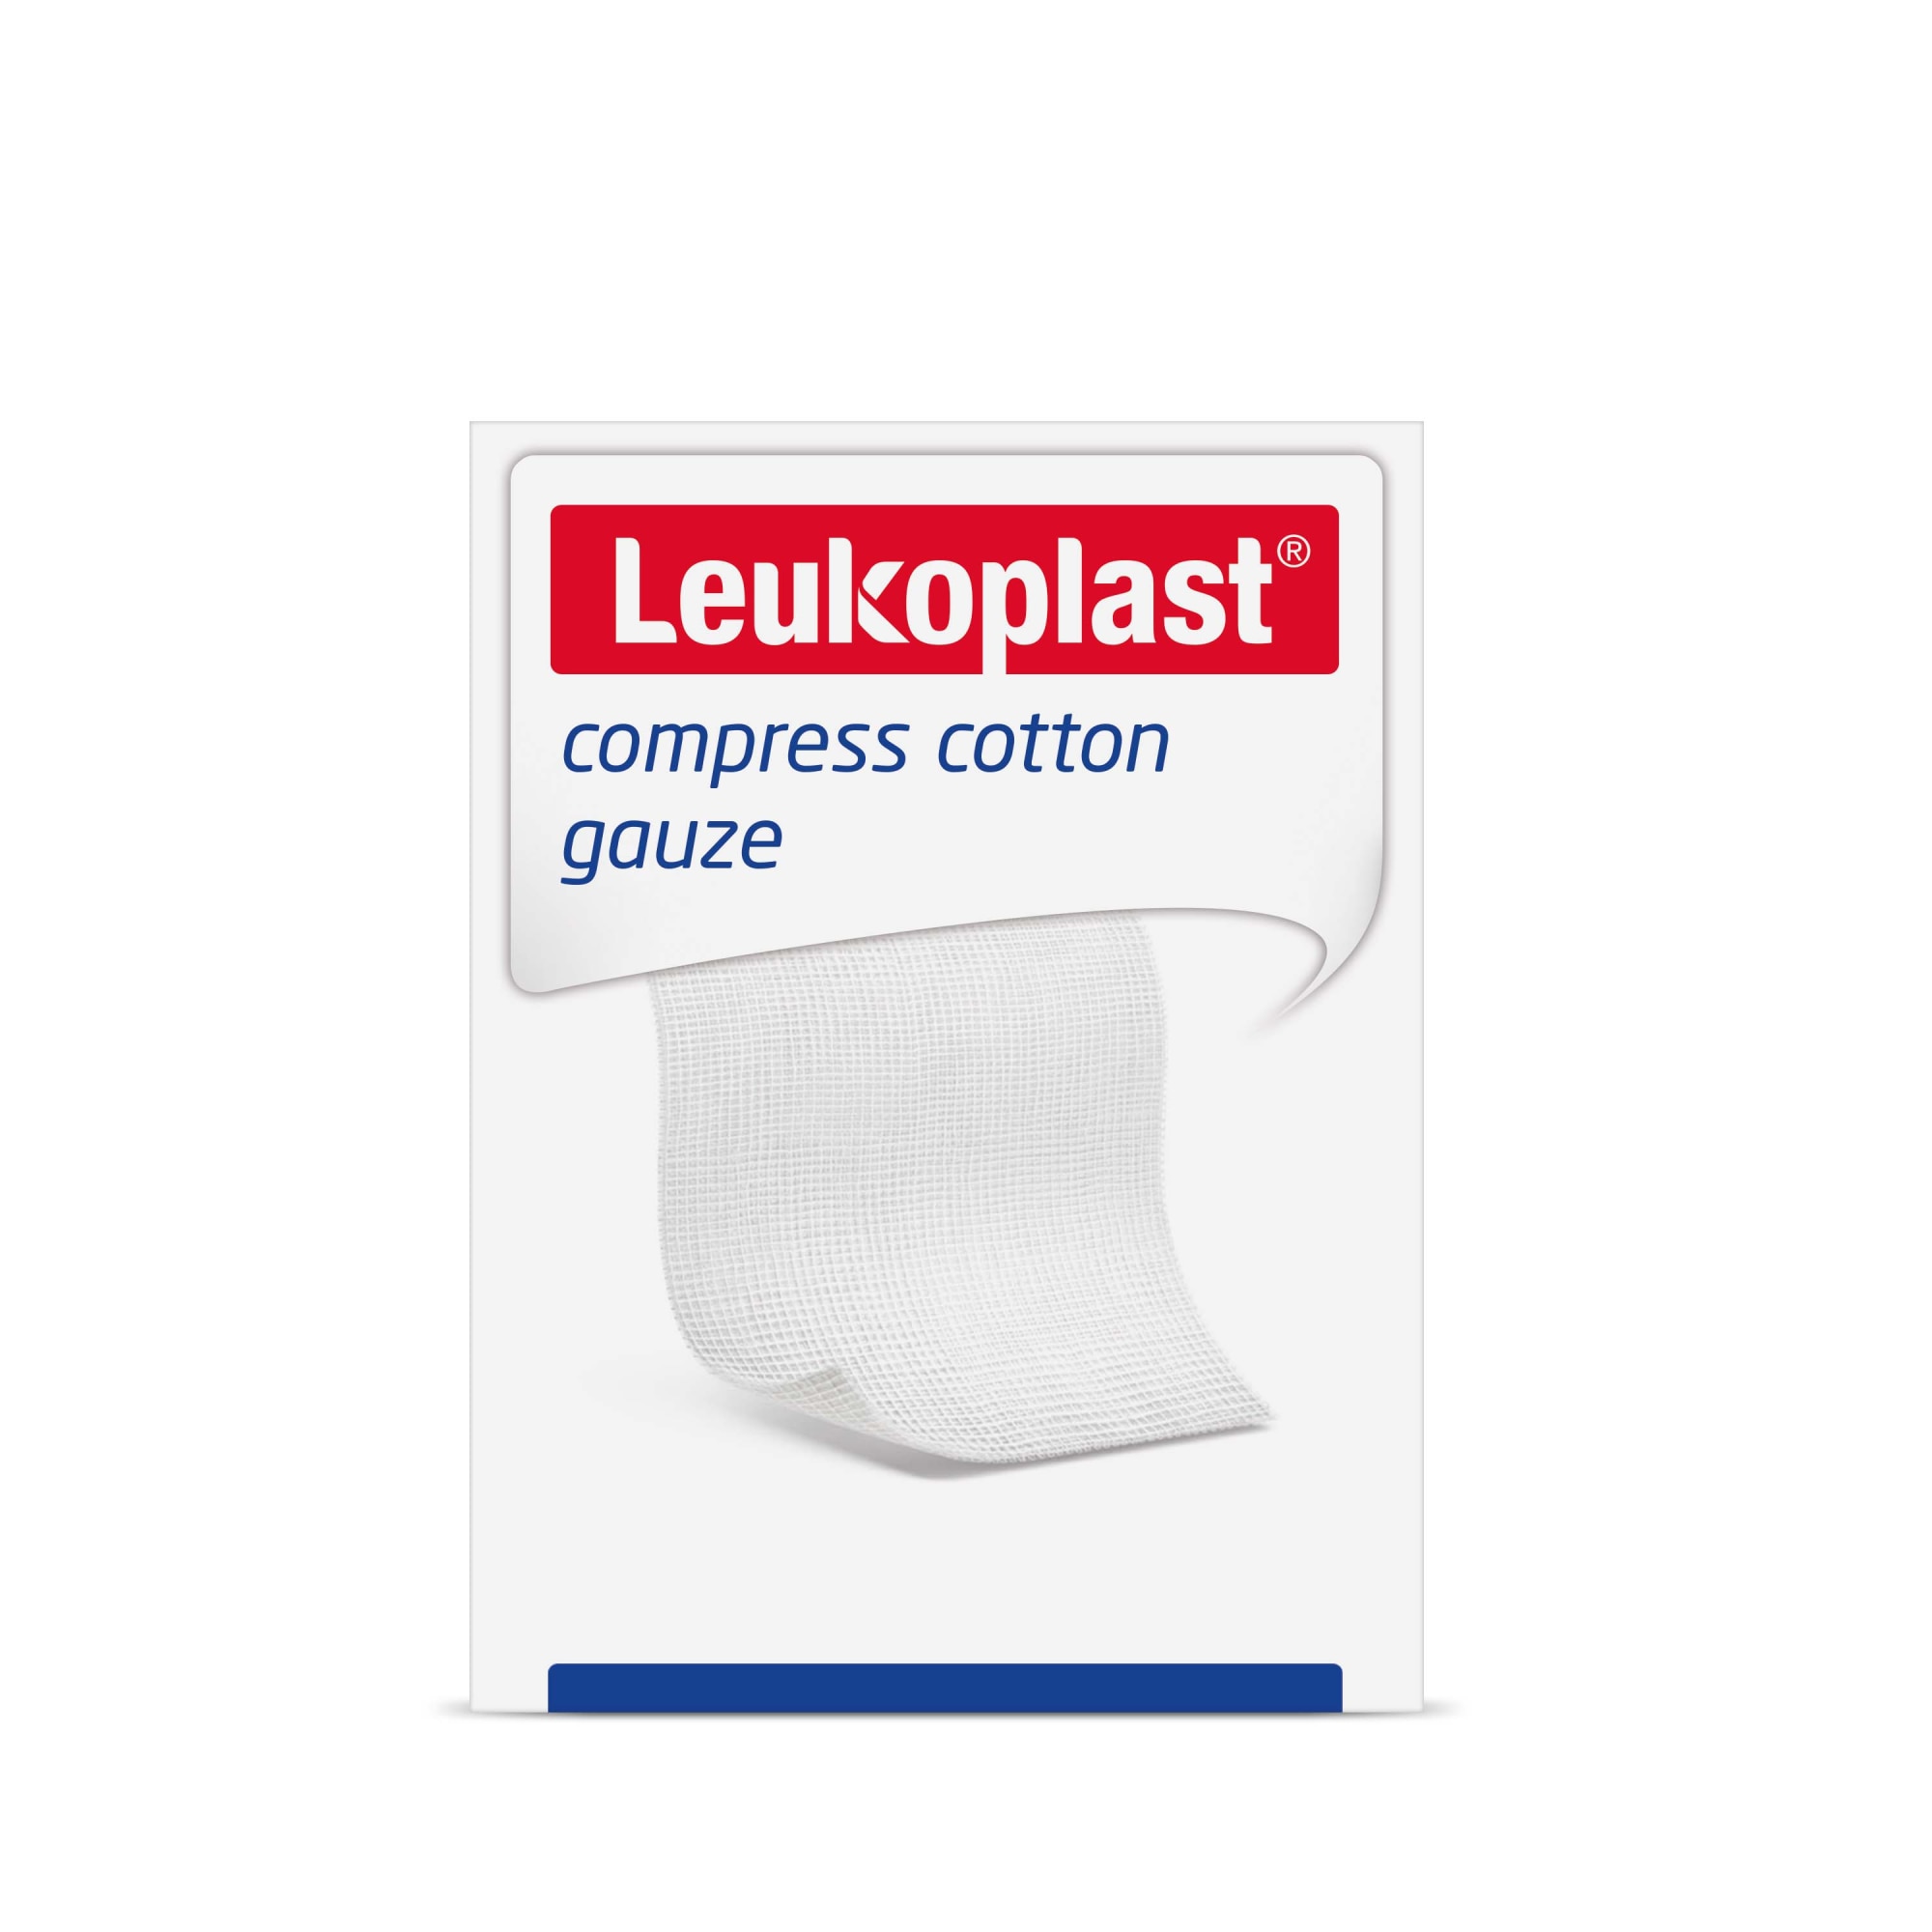 Leukoplast compress cotton gauze - absorbent swabs for wound care